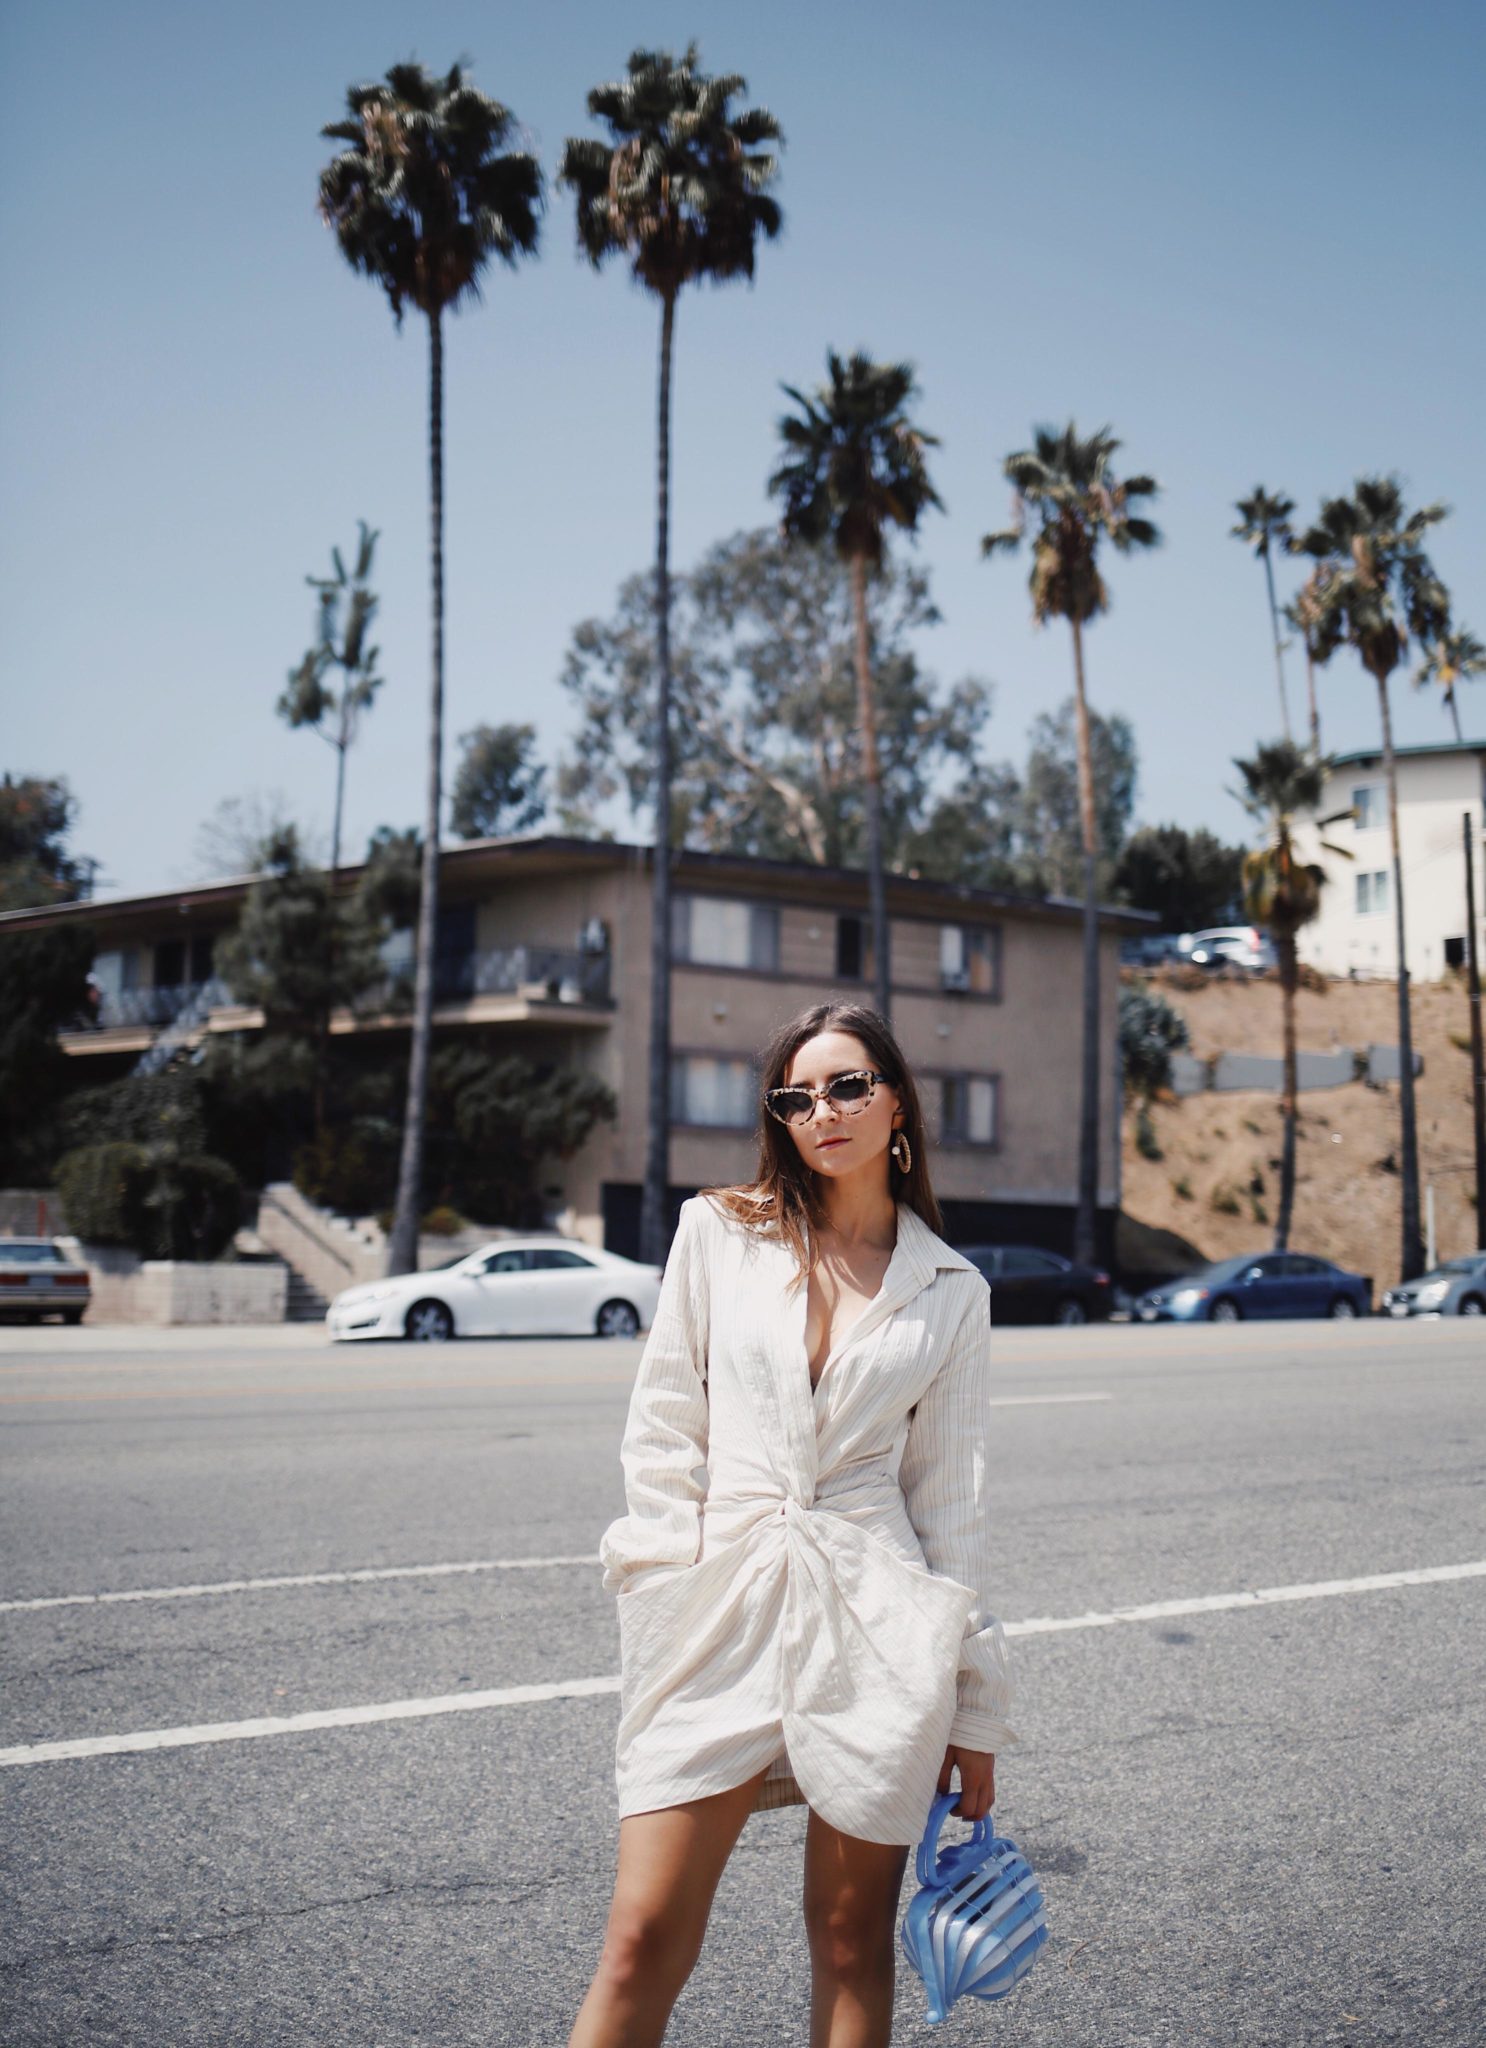 Discover Jacquemus the French Not So Parisian Designer on Houseofcomil.com. French Fashion Blogger Julia Comil is wearing a Jacquemus Dress, Bag Cult Gaia, and Krewe x Reformation sunglasses in Los Angeles